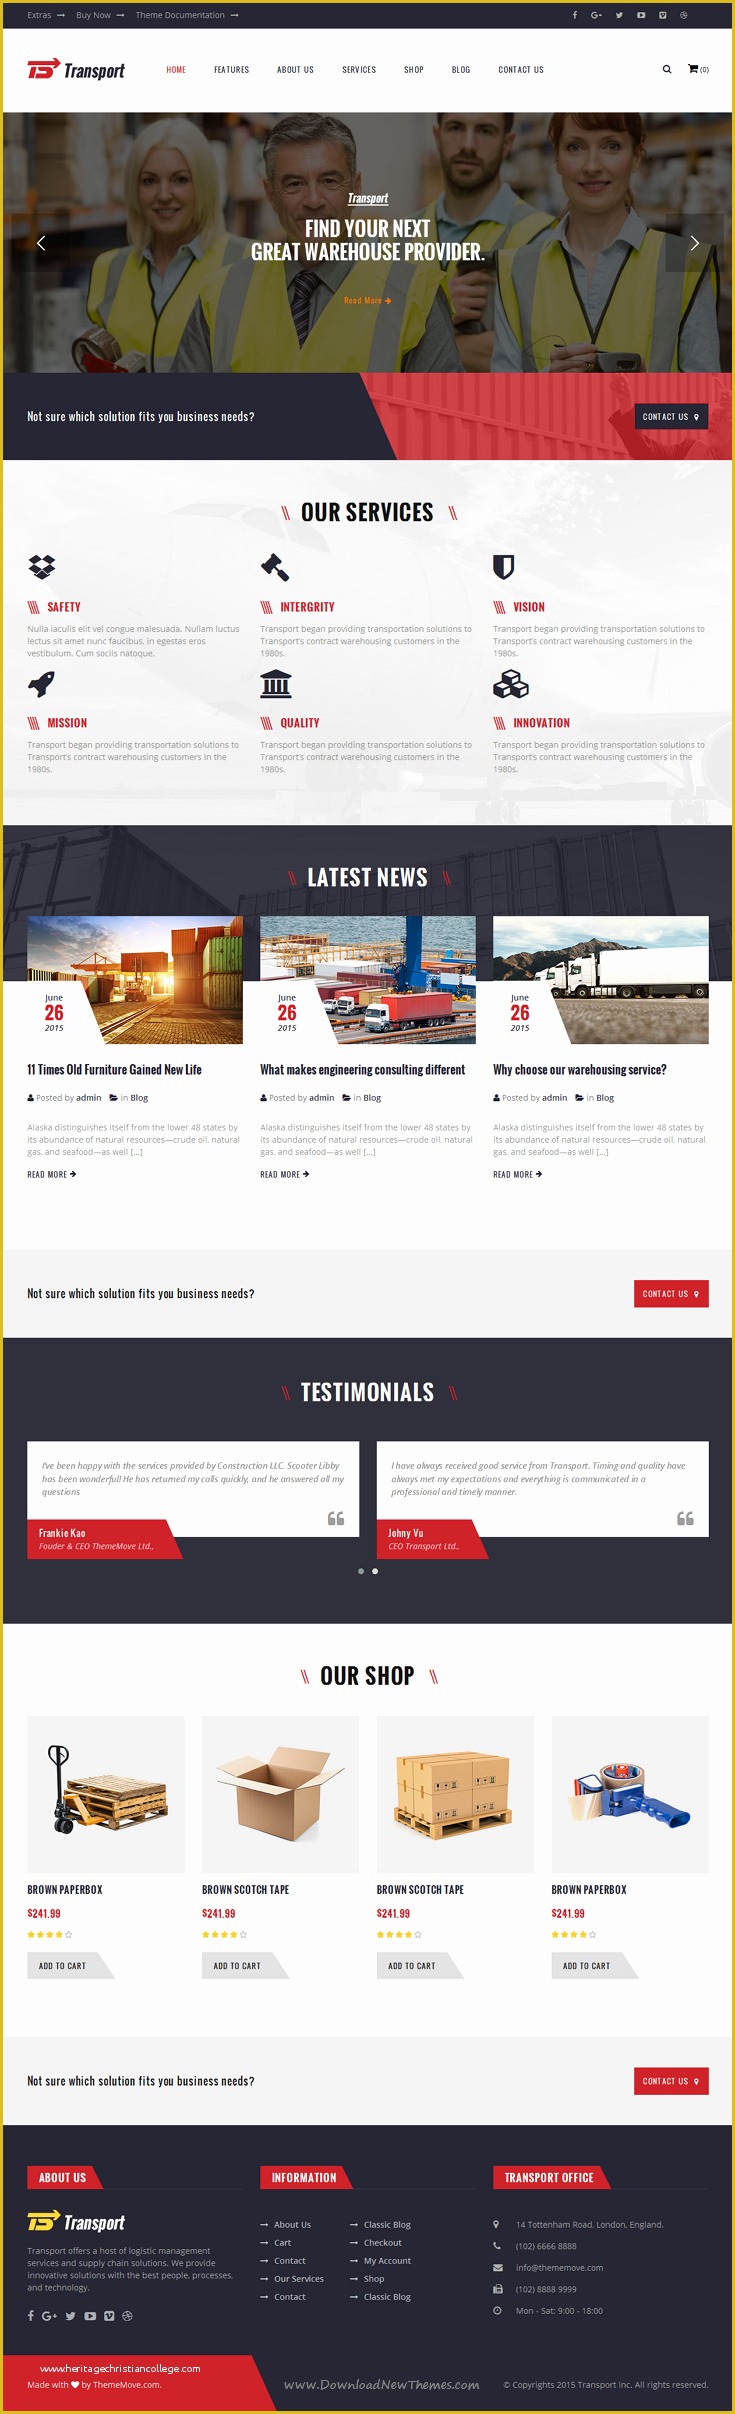 Trucking Transportation &amp; Logistics HTML Template Free Download Of Transport is Wonderful Bootstrap HTML Template for